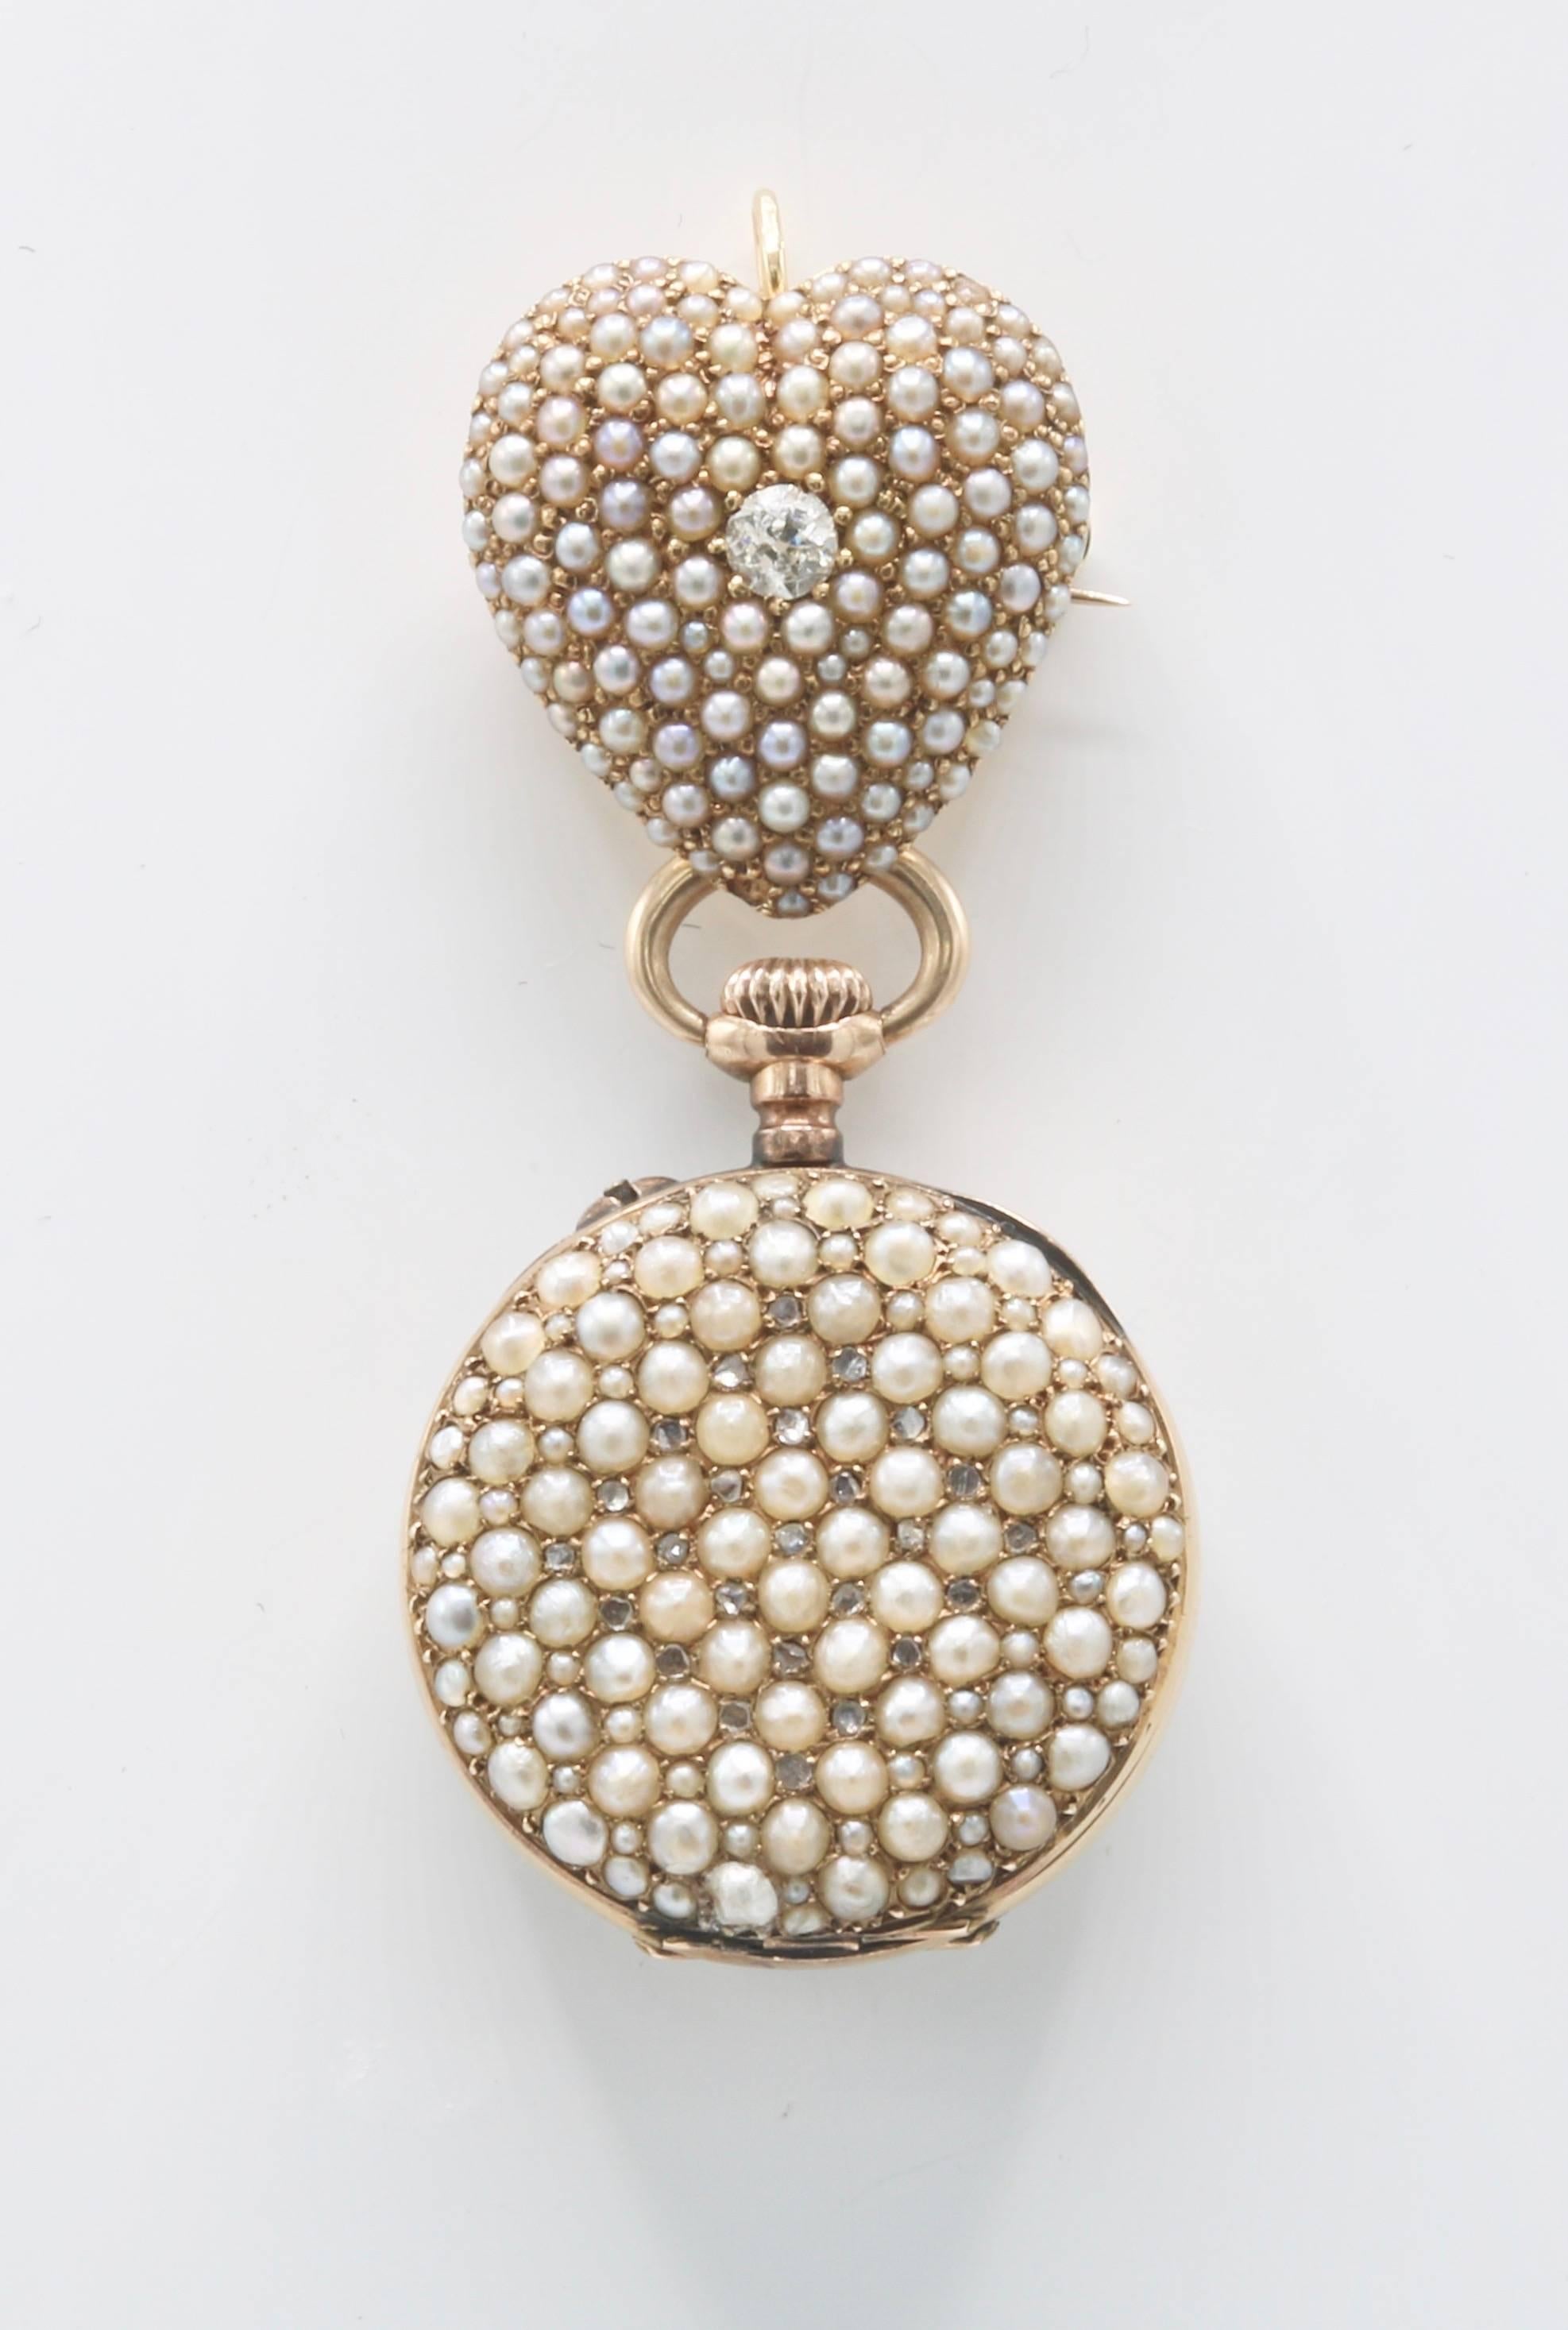 Natural Pearl and Diamond Pendant and Brooch Lapel Watch

Antique 14k Gold 
